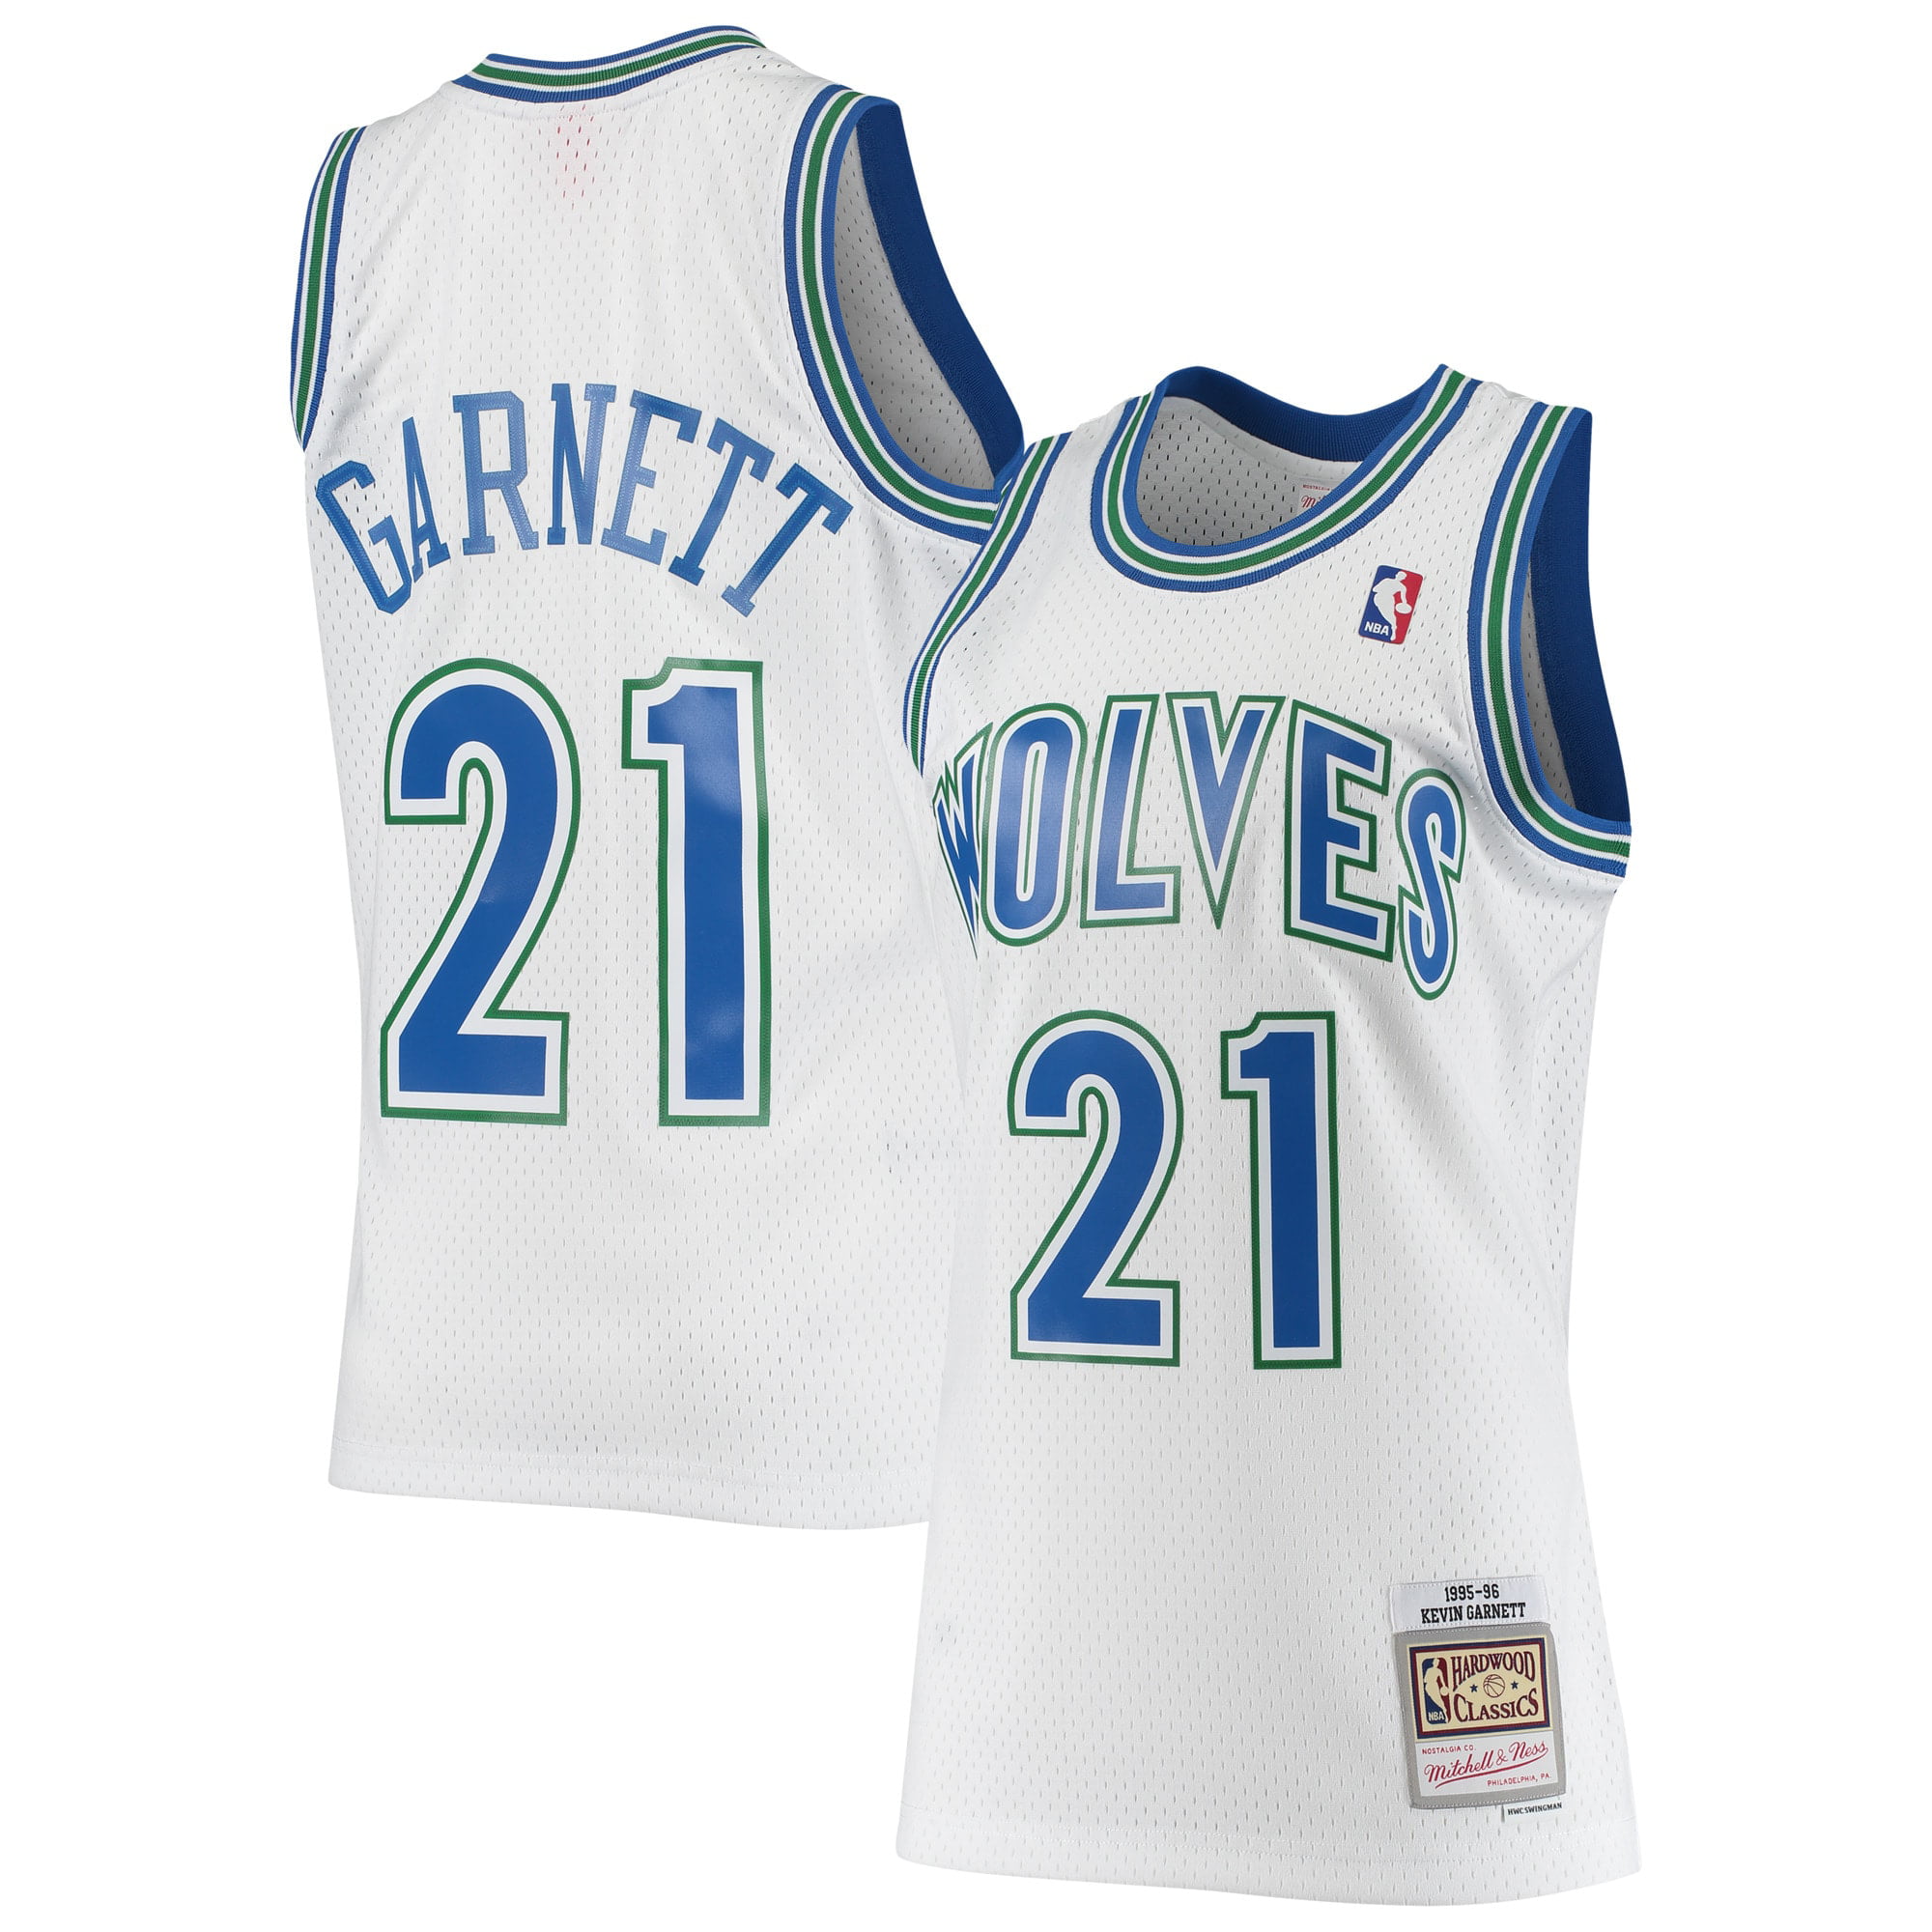 Kevin Garnett Minnesota Timberwolves Autographed Blue Mitchell & Ness  Authentic Jersey with Big Ticket Inscription